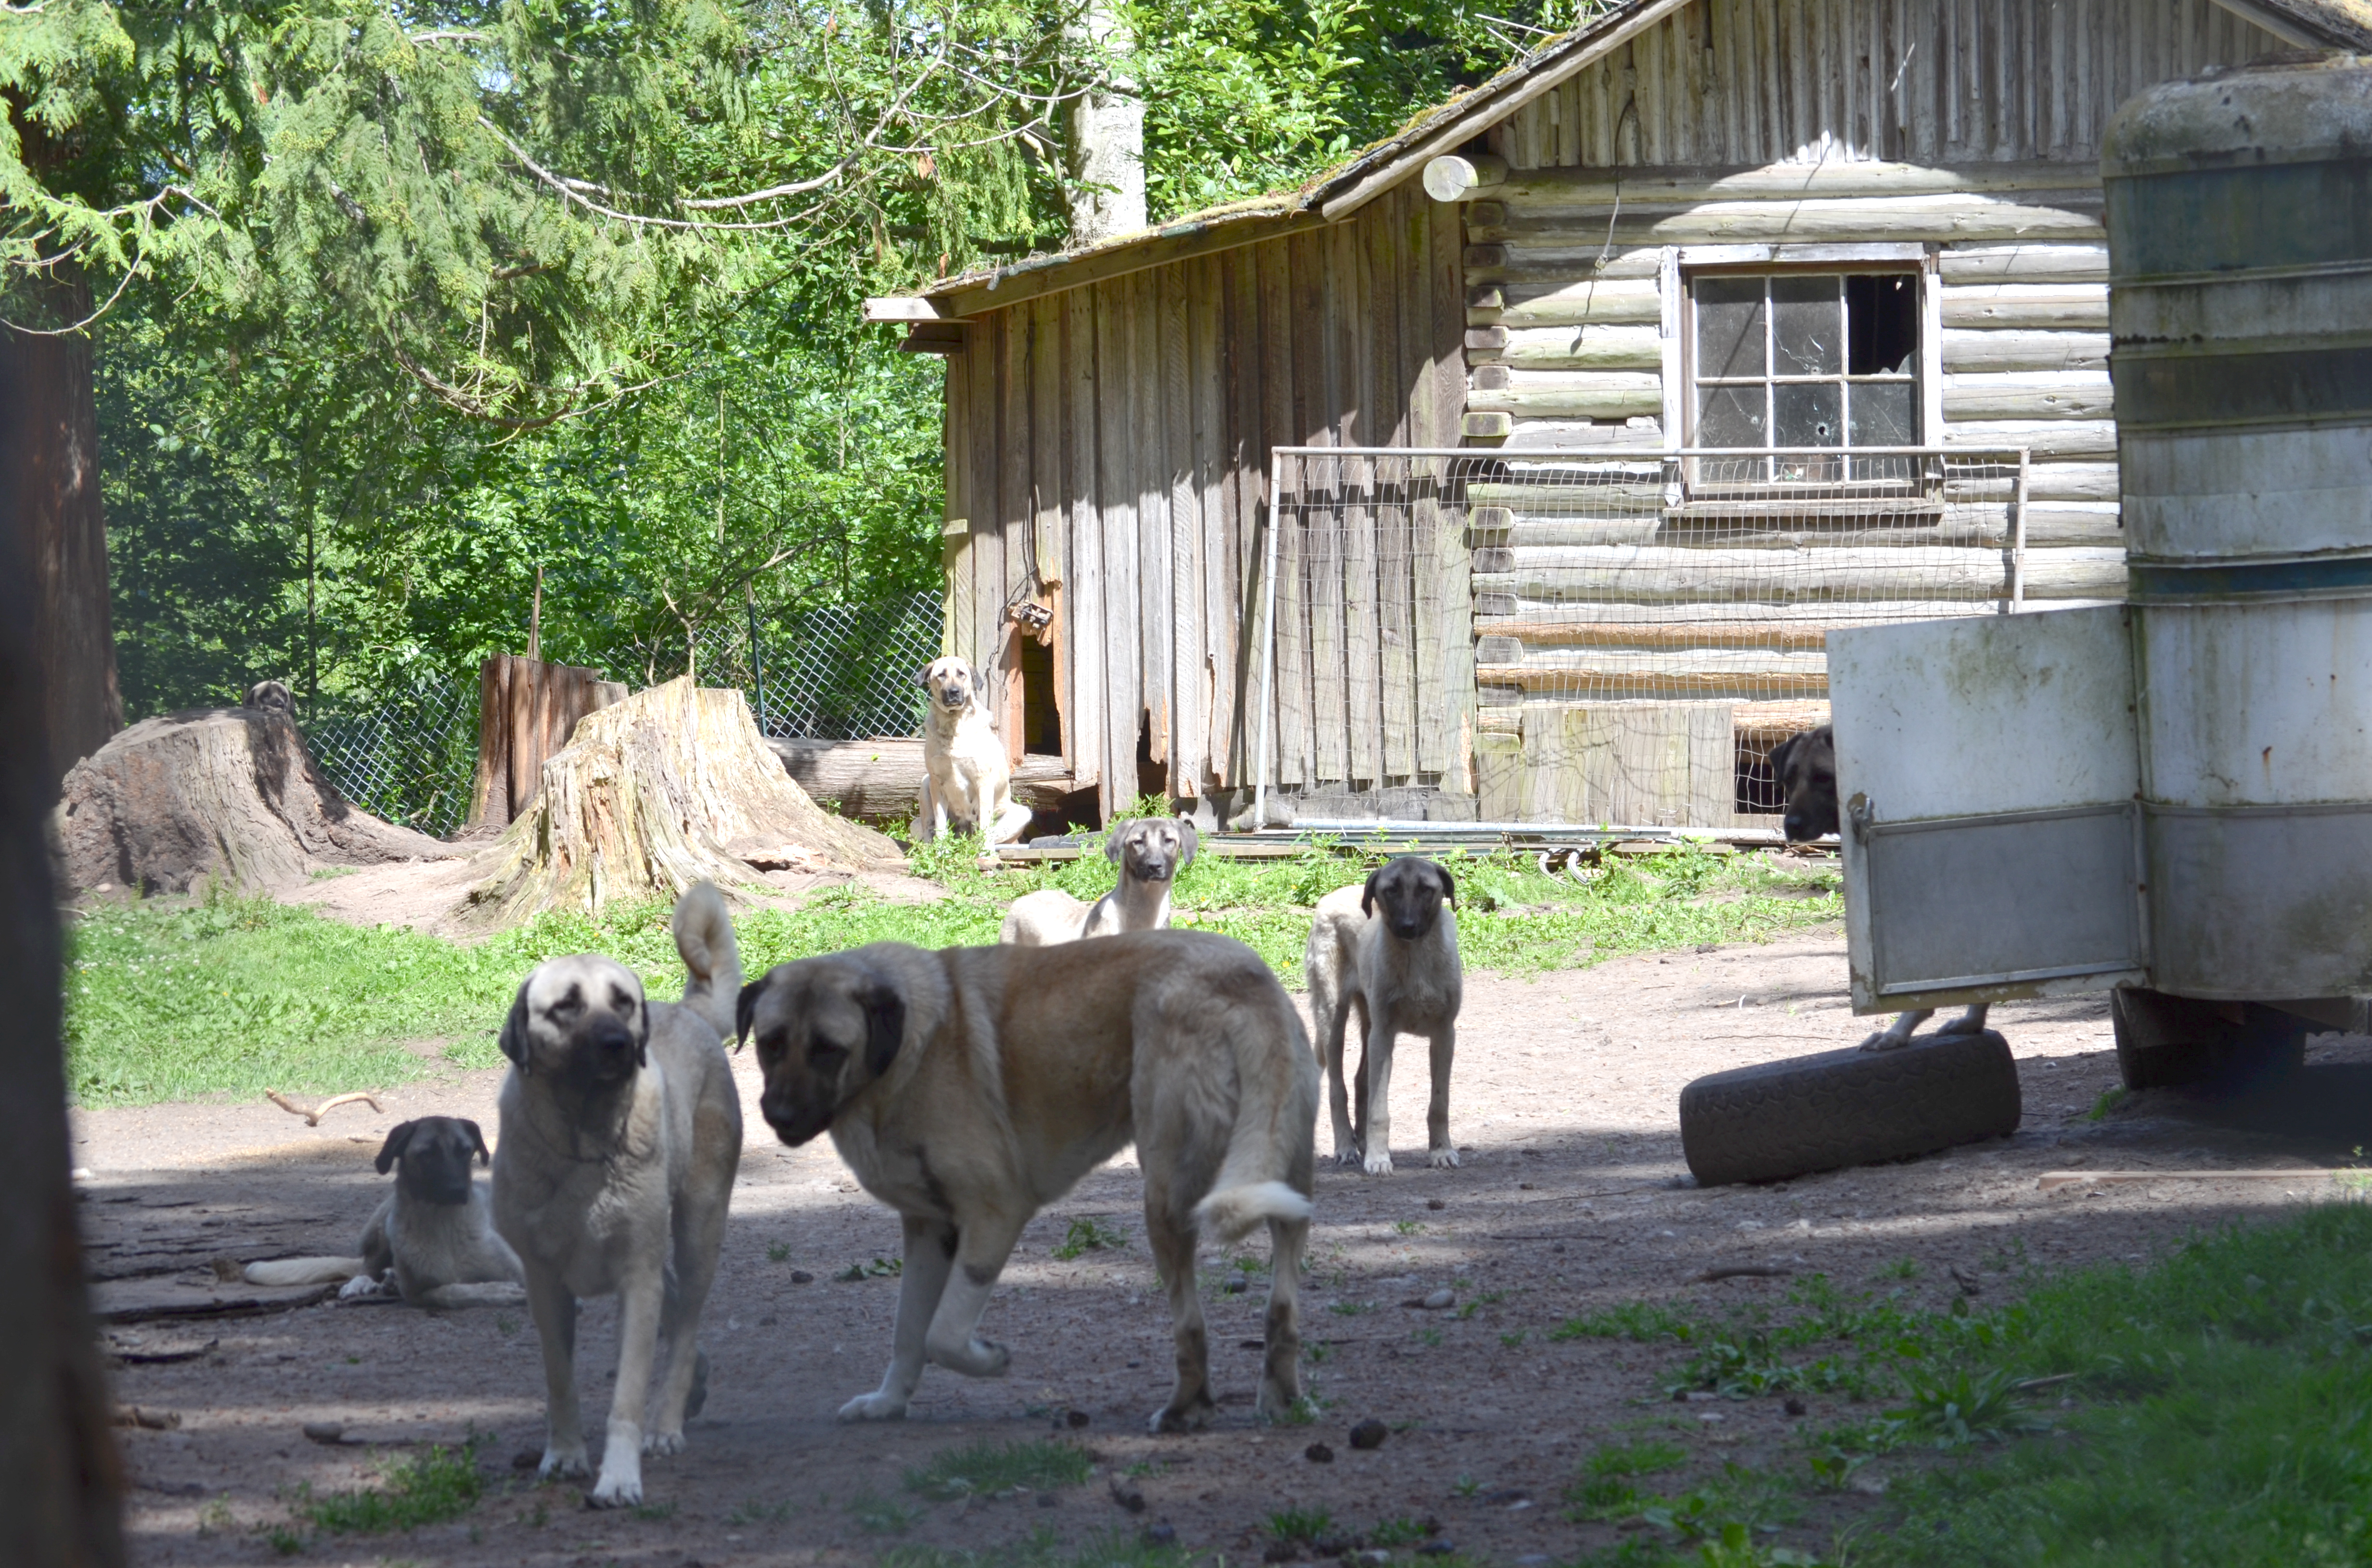 Dogs identified as Anatolian kangals lived under a shed or cabin before being moved to safer facilities. (Jefferson County Sheriff's Office)